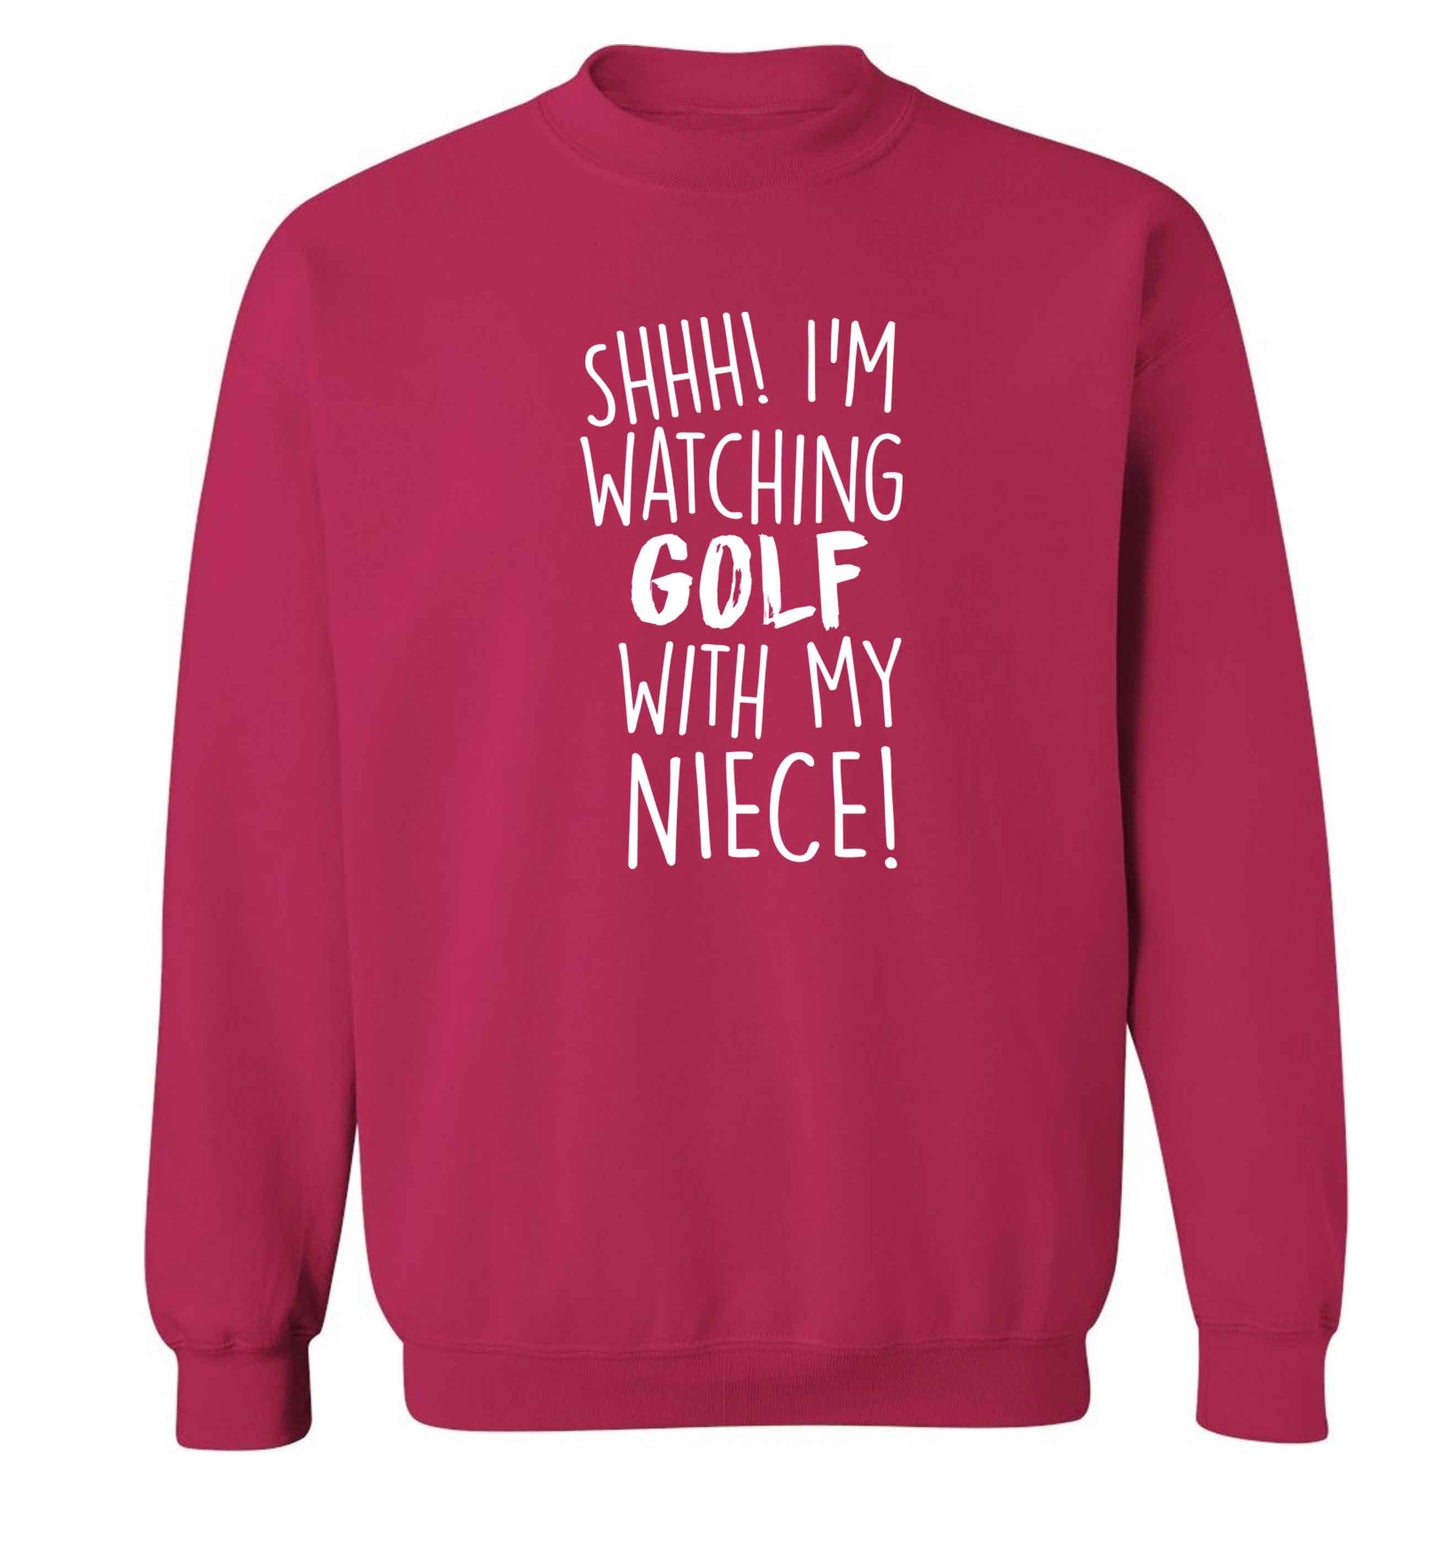 Shh I'm watching golf with my niece Adult's unisex pink Sweater 2XL